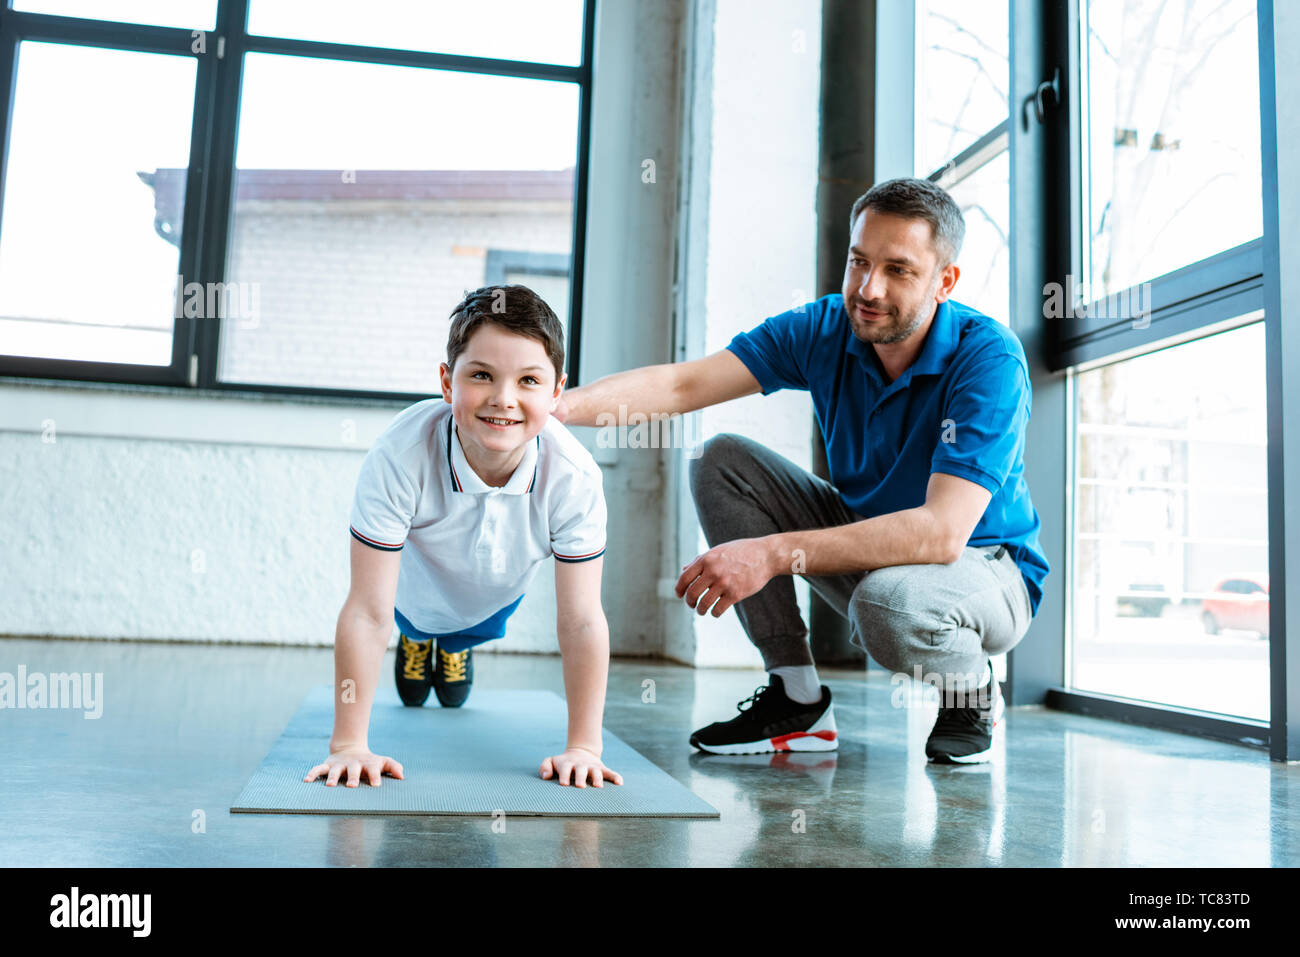 father helping smiling son with plank exercise at gym Stock Photo